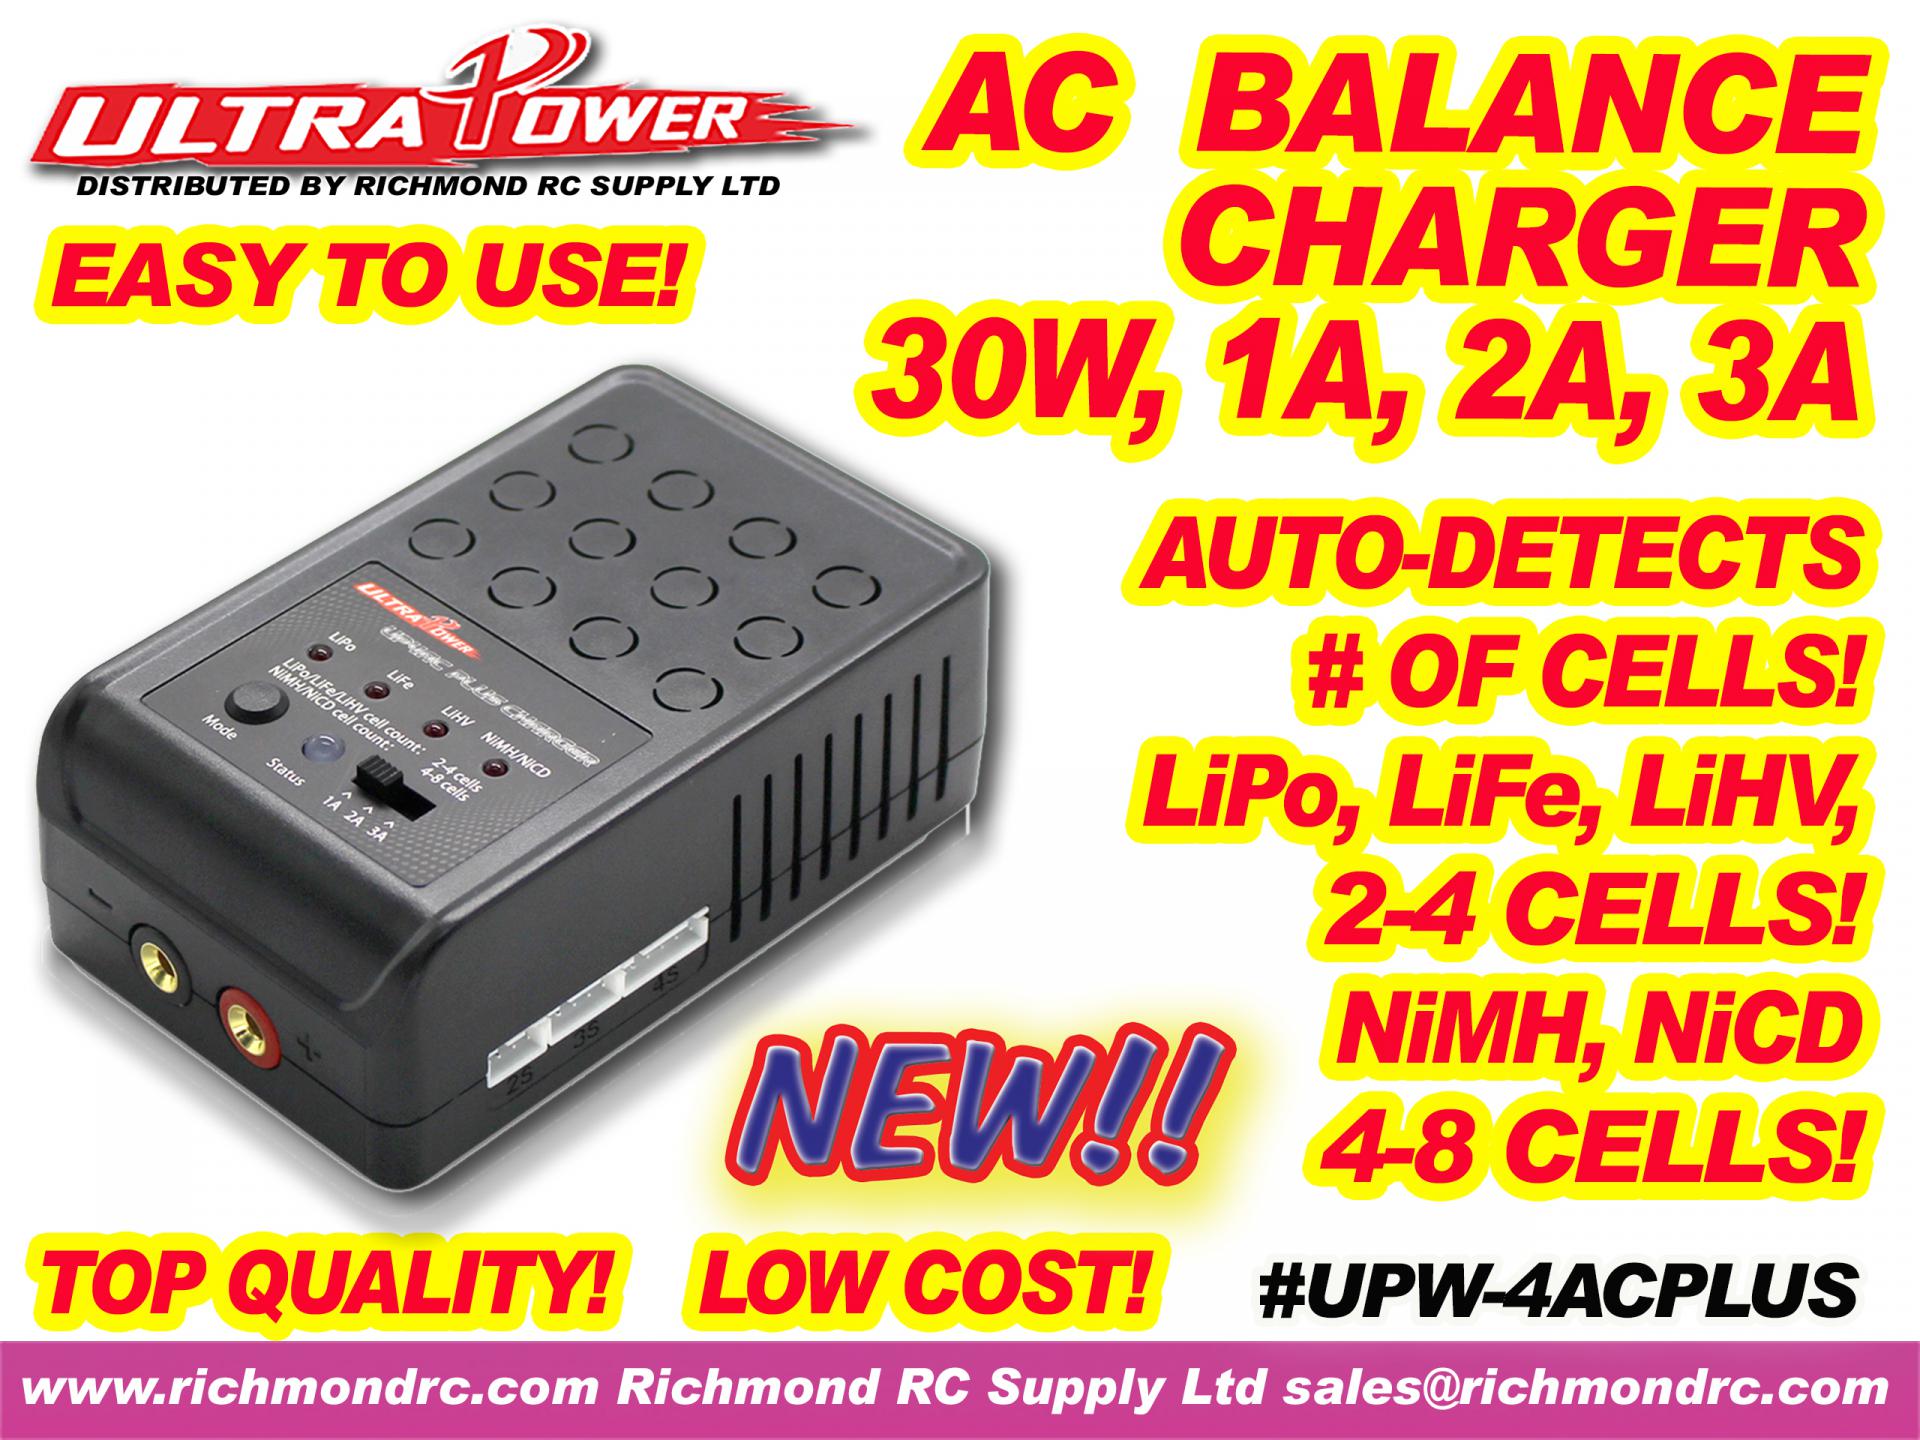 ULTRA POWER CHARGER - AC, 30W, 1A 2A 3A w/LED